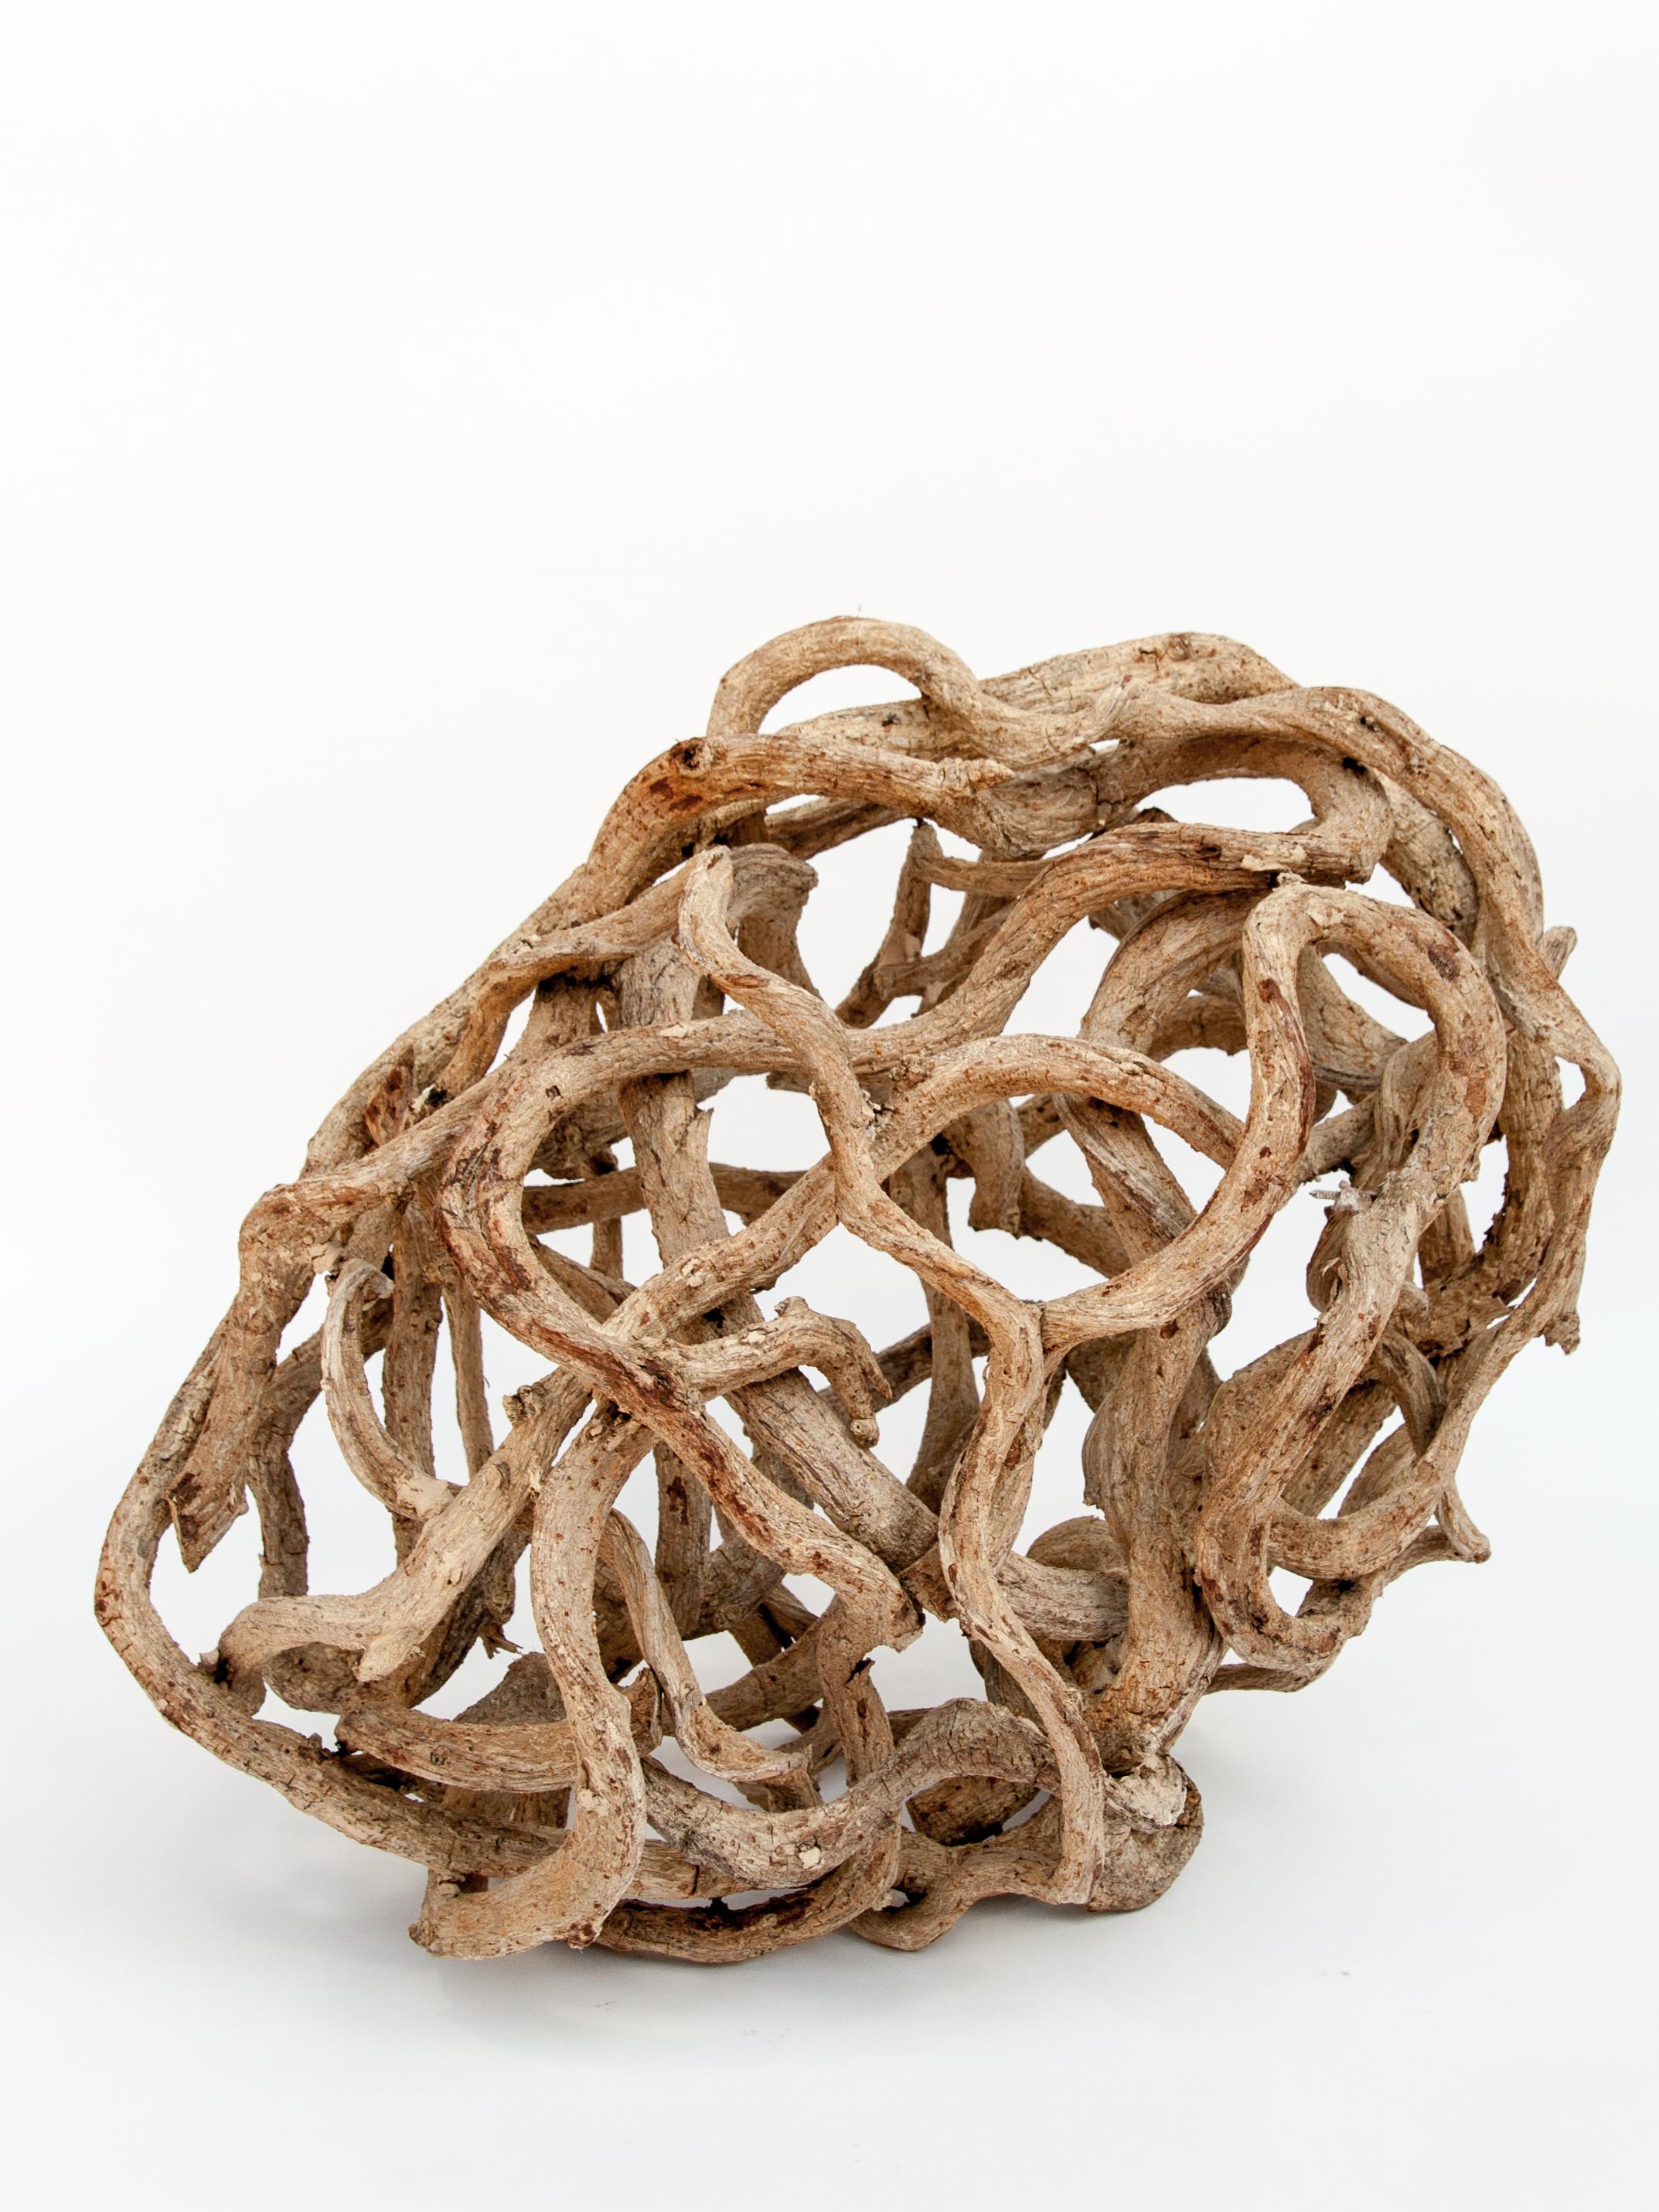 Liana Vine organic sculpture in ovoid shape from Thailand.
The liana vines for this piece were gathered from the forests of eastern Thailand. They were cleaned and bleached and wound together into an ovoid shape.
This piece works well vertically